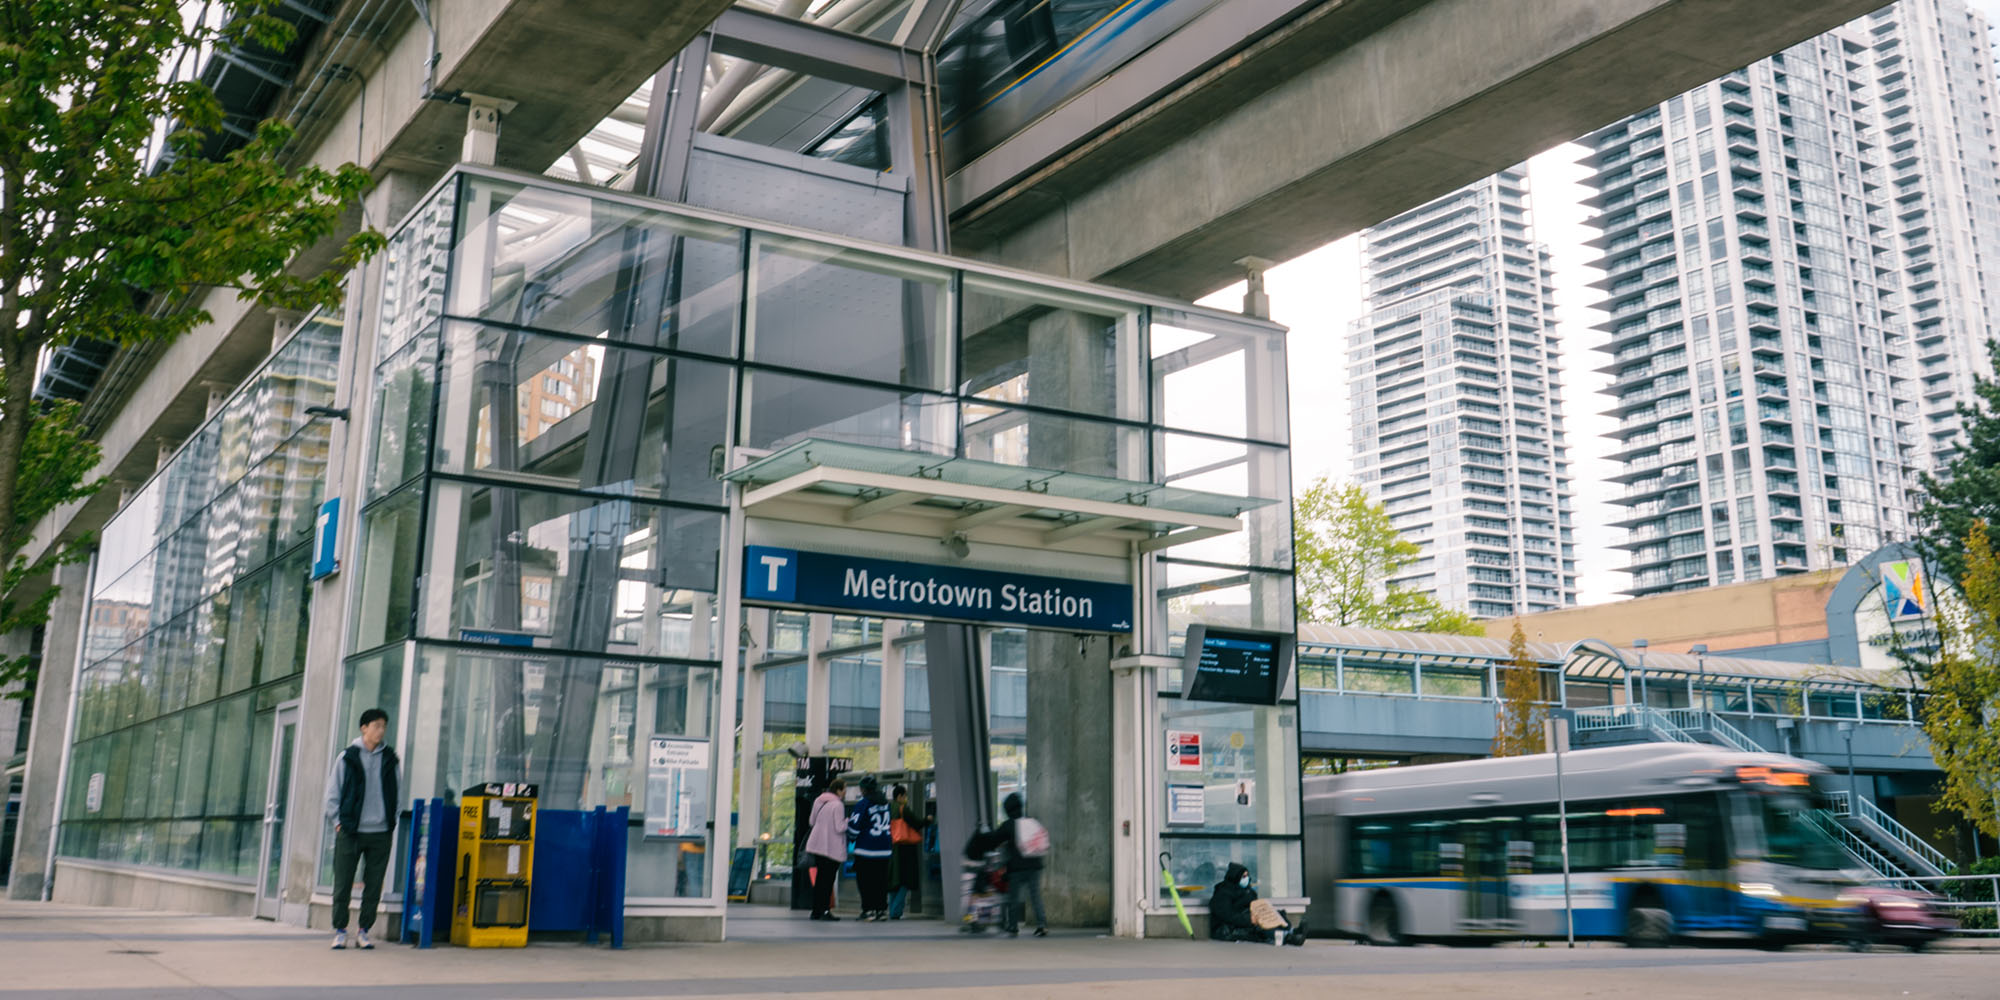 The east stationhouse entrance at Metrotown Station